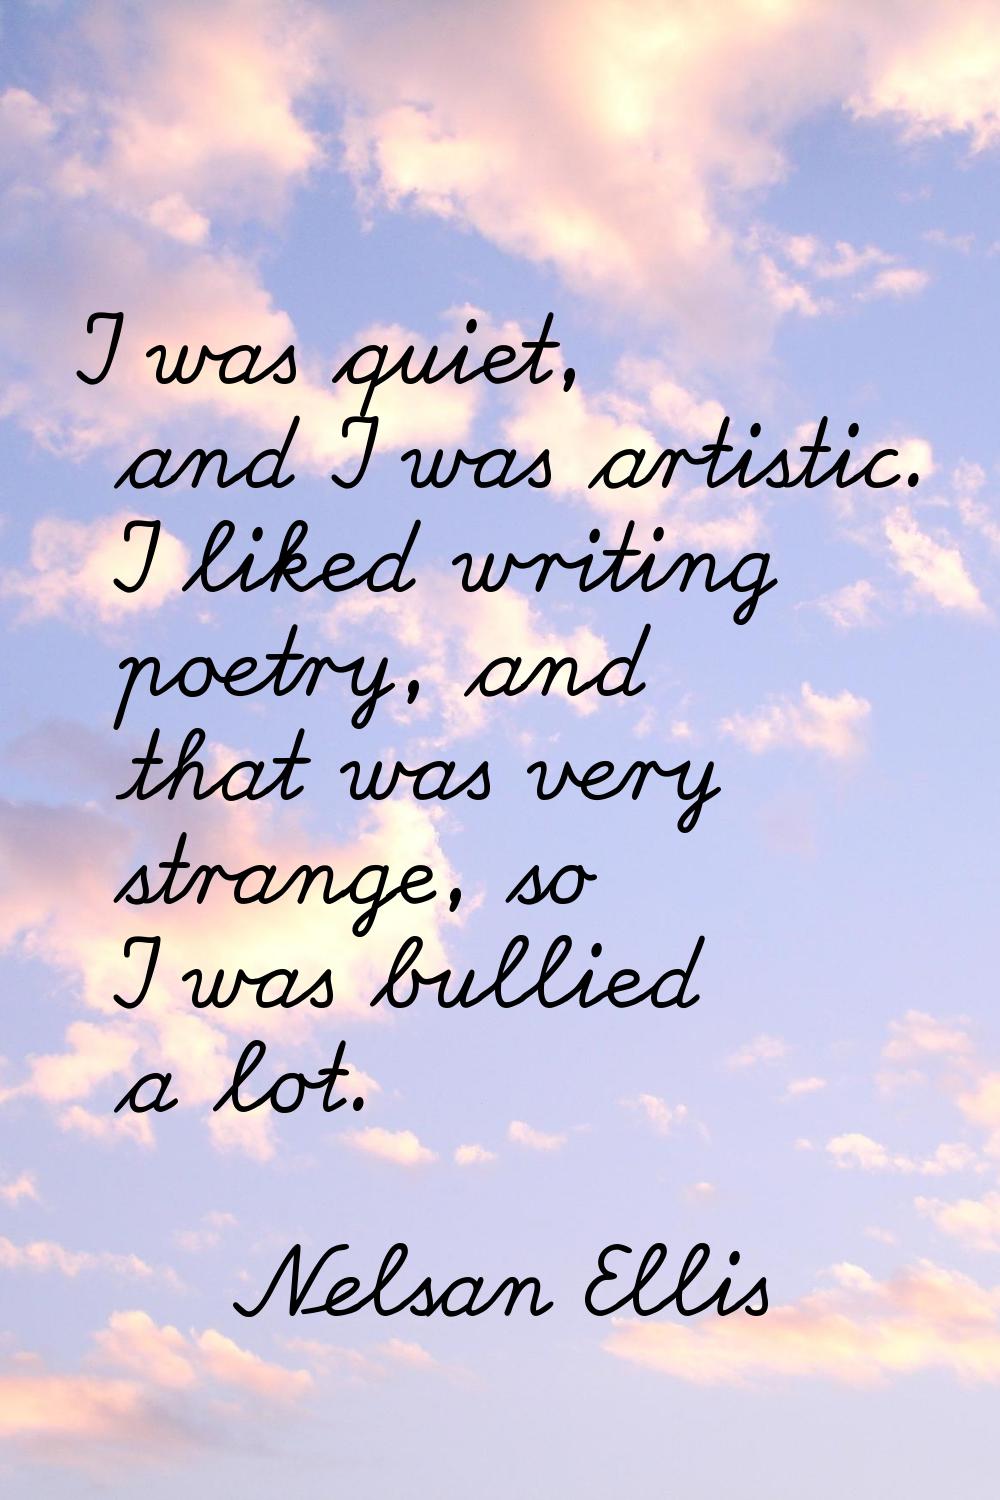 I was quiet, and I was artistic. I liked writing poetry, and that was very strange, so I was bullie